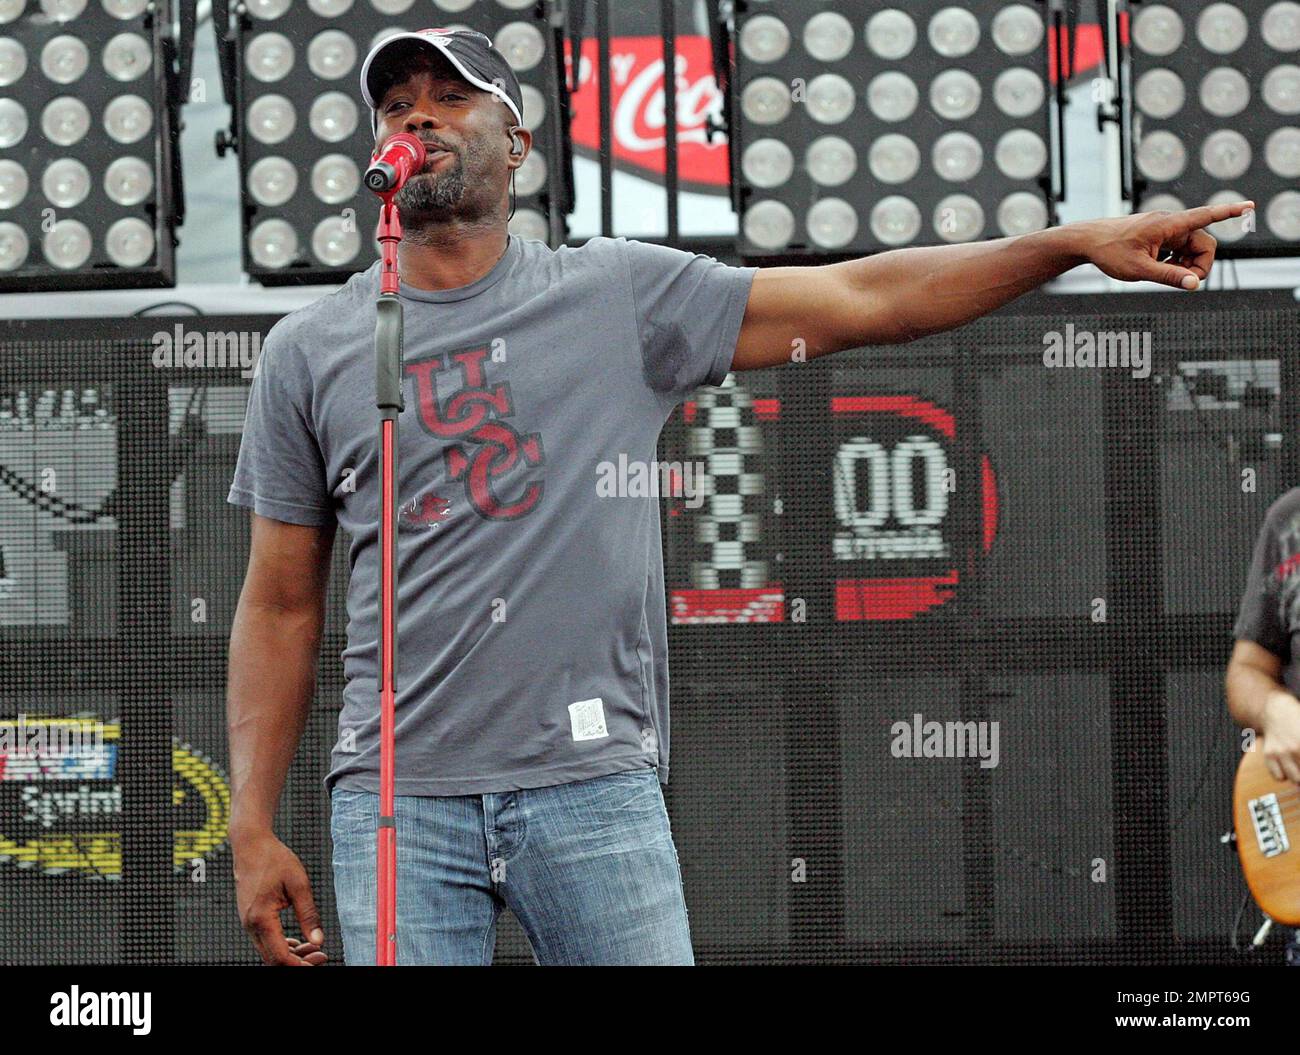 Lead singer of Hootie & the Blowfish and CMA New Artist of the Year winner, Darius Rucker performs live in the rain prior to the NASCAR Coke Zero 400 at Daytona International Speedway.  Despite the drizzle the rock-turned-country singer seemed happy as he moved around the stage singing and playing his guitar. Daytona Beach, FL. 07/03/10.   . Stock Photo